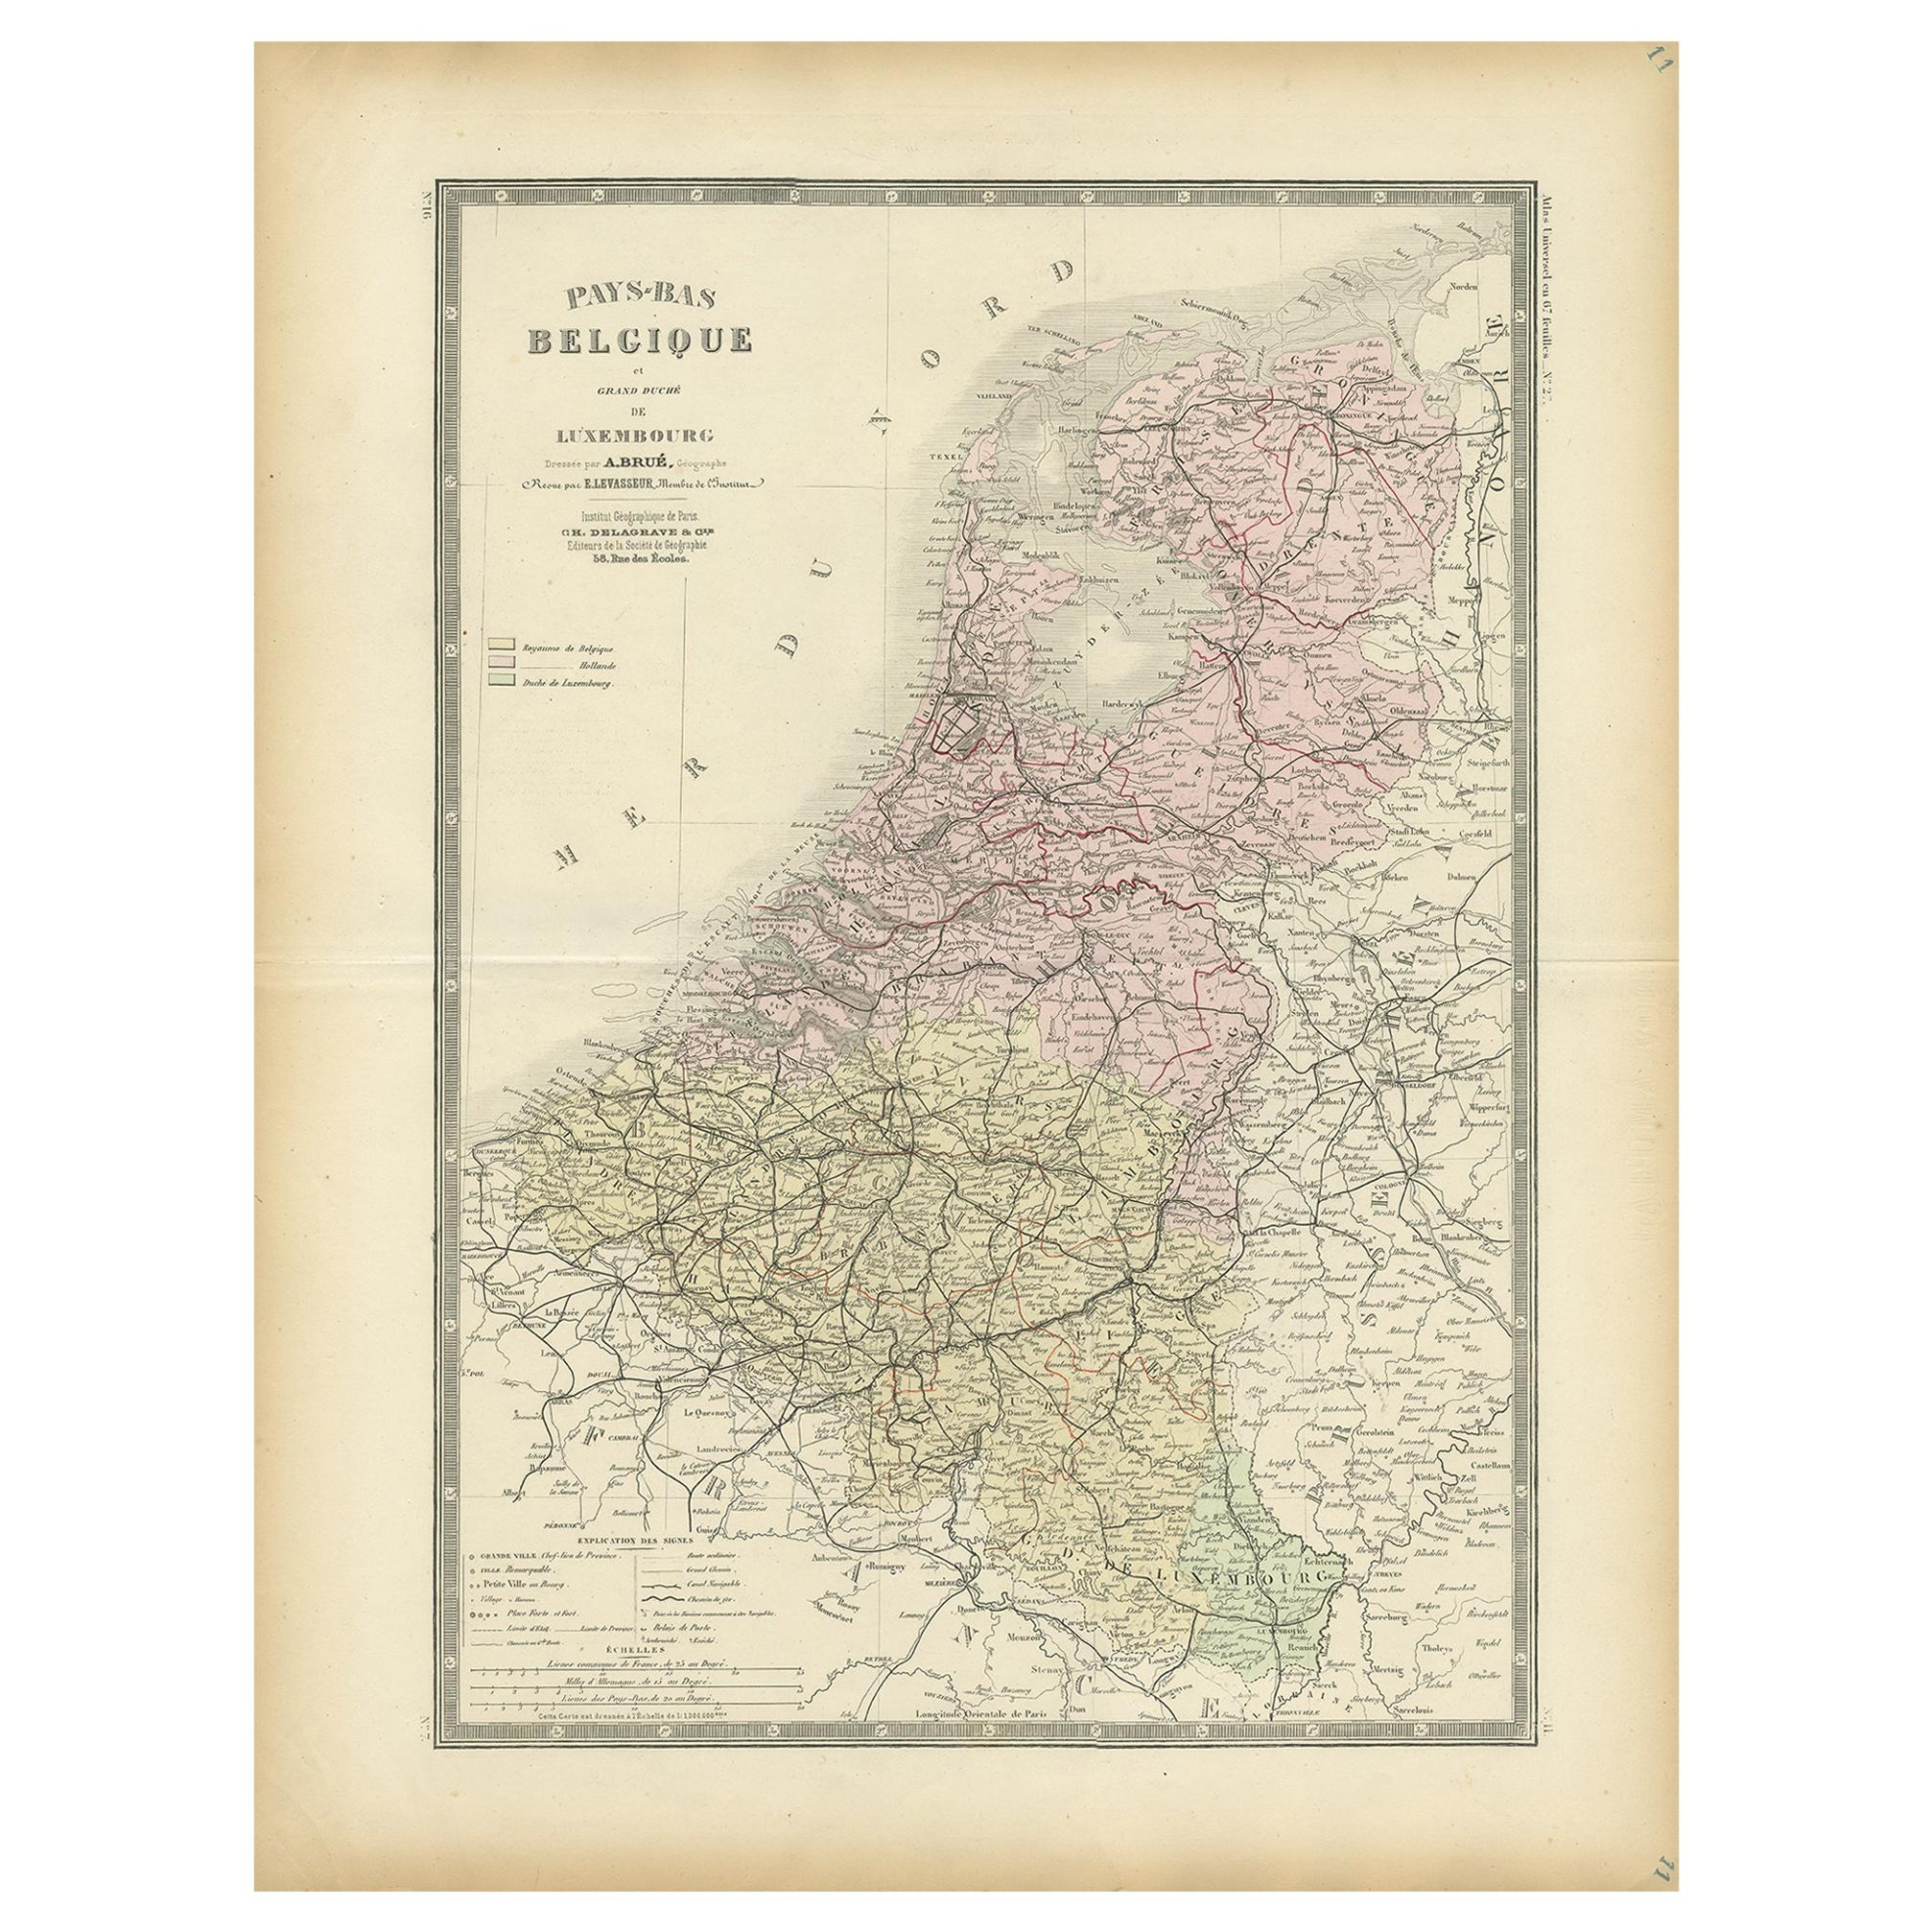 Decorative Antique Map of the Netherlands and Belgium,  ca.1875